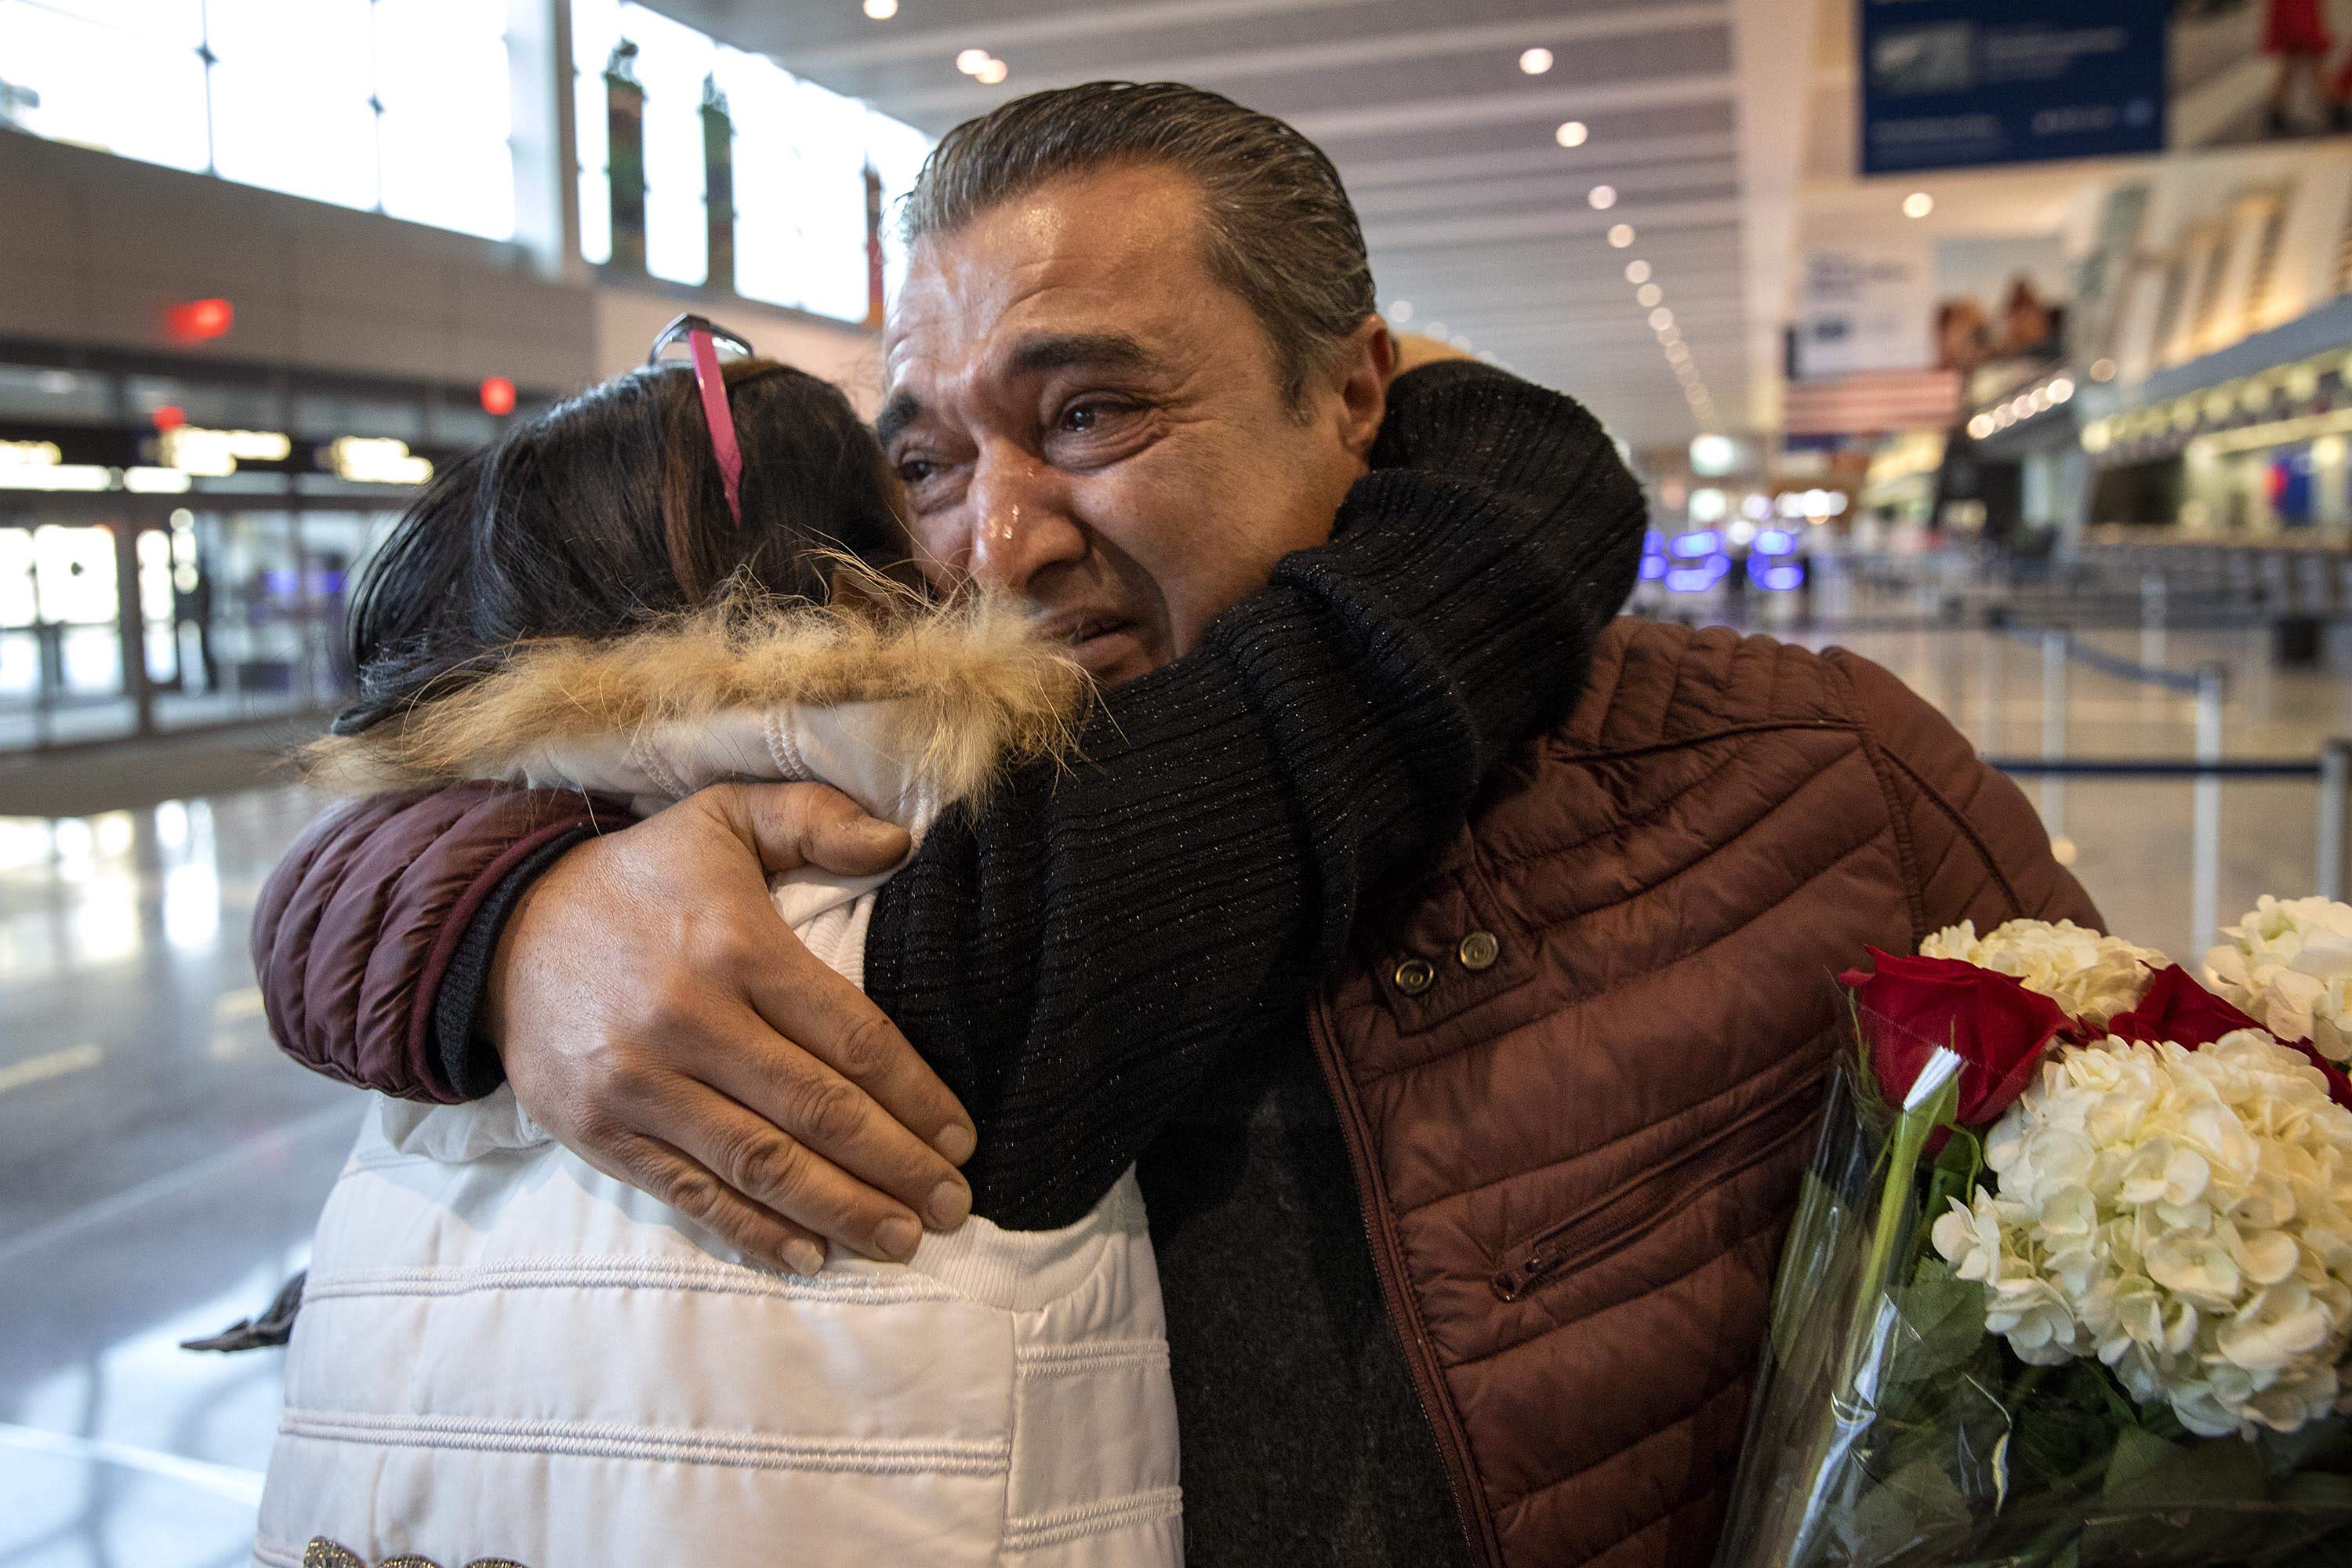 Alaa Issa hugs his sister Lina, as she and her family arrive at Logan Airport. (Robin Lubbock/WBUR)